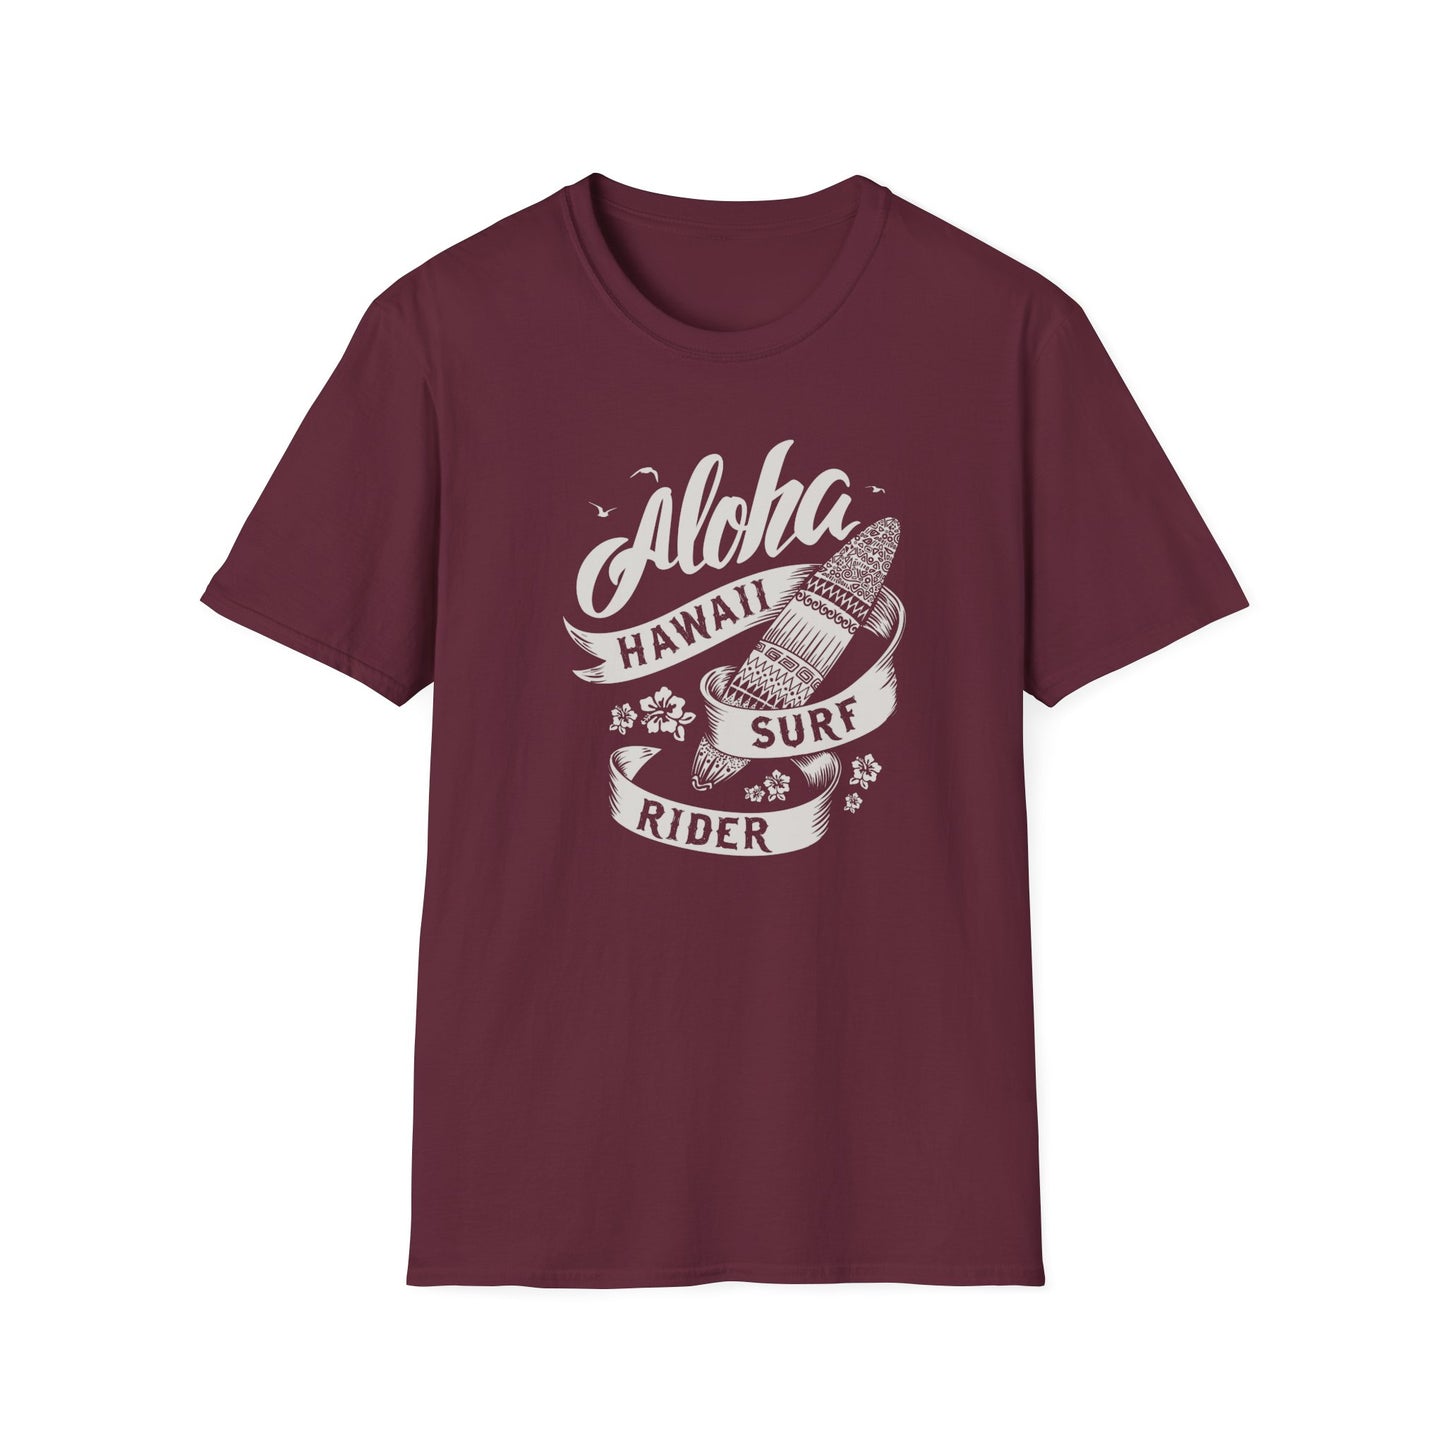 Aloha Hawaii Surf Rider T-Shirt: Ride the Waves in Style